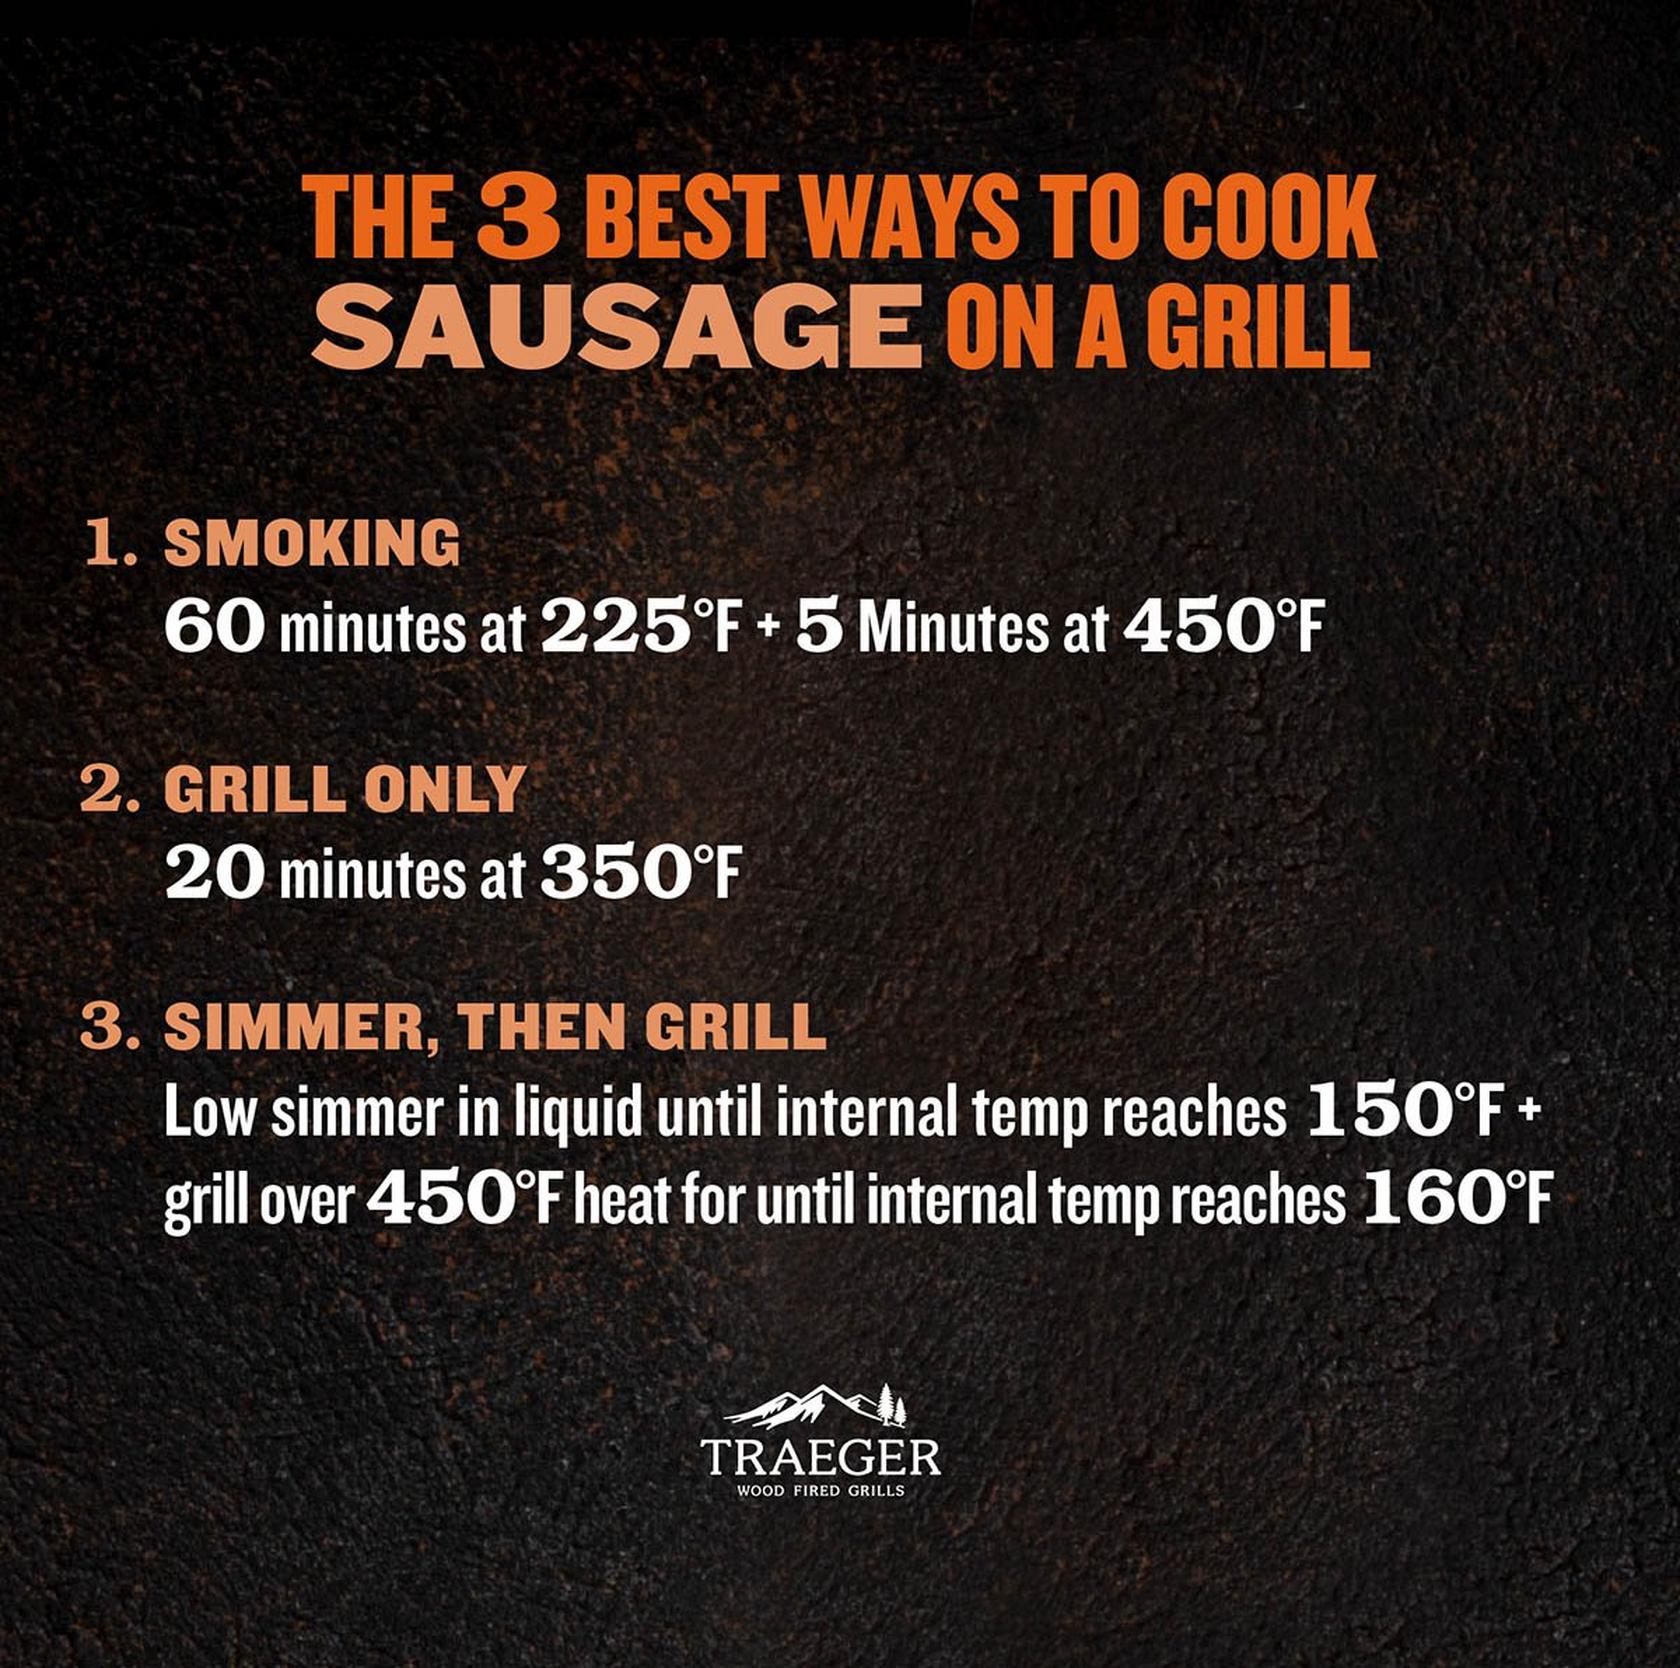 sausage-on-a-grill